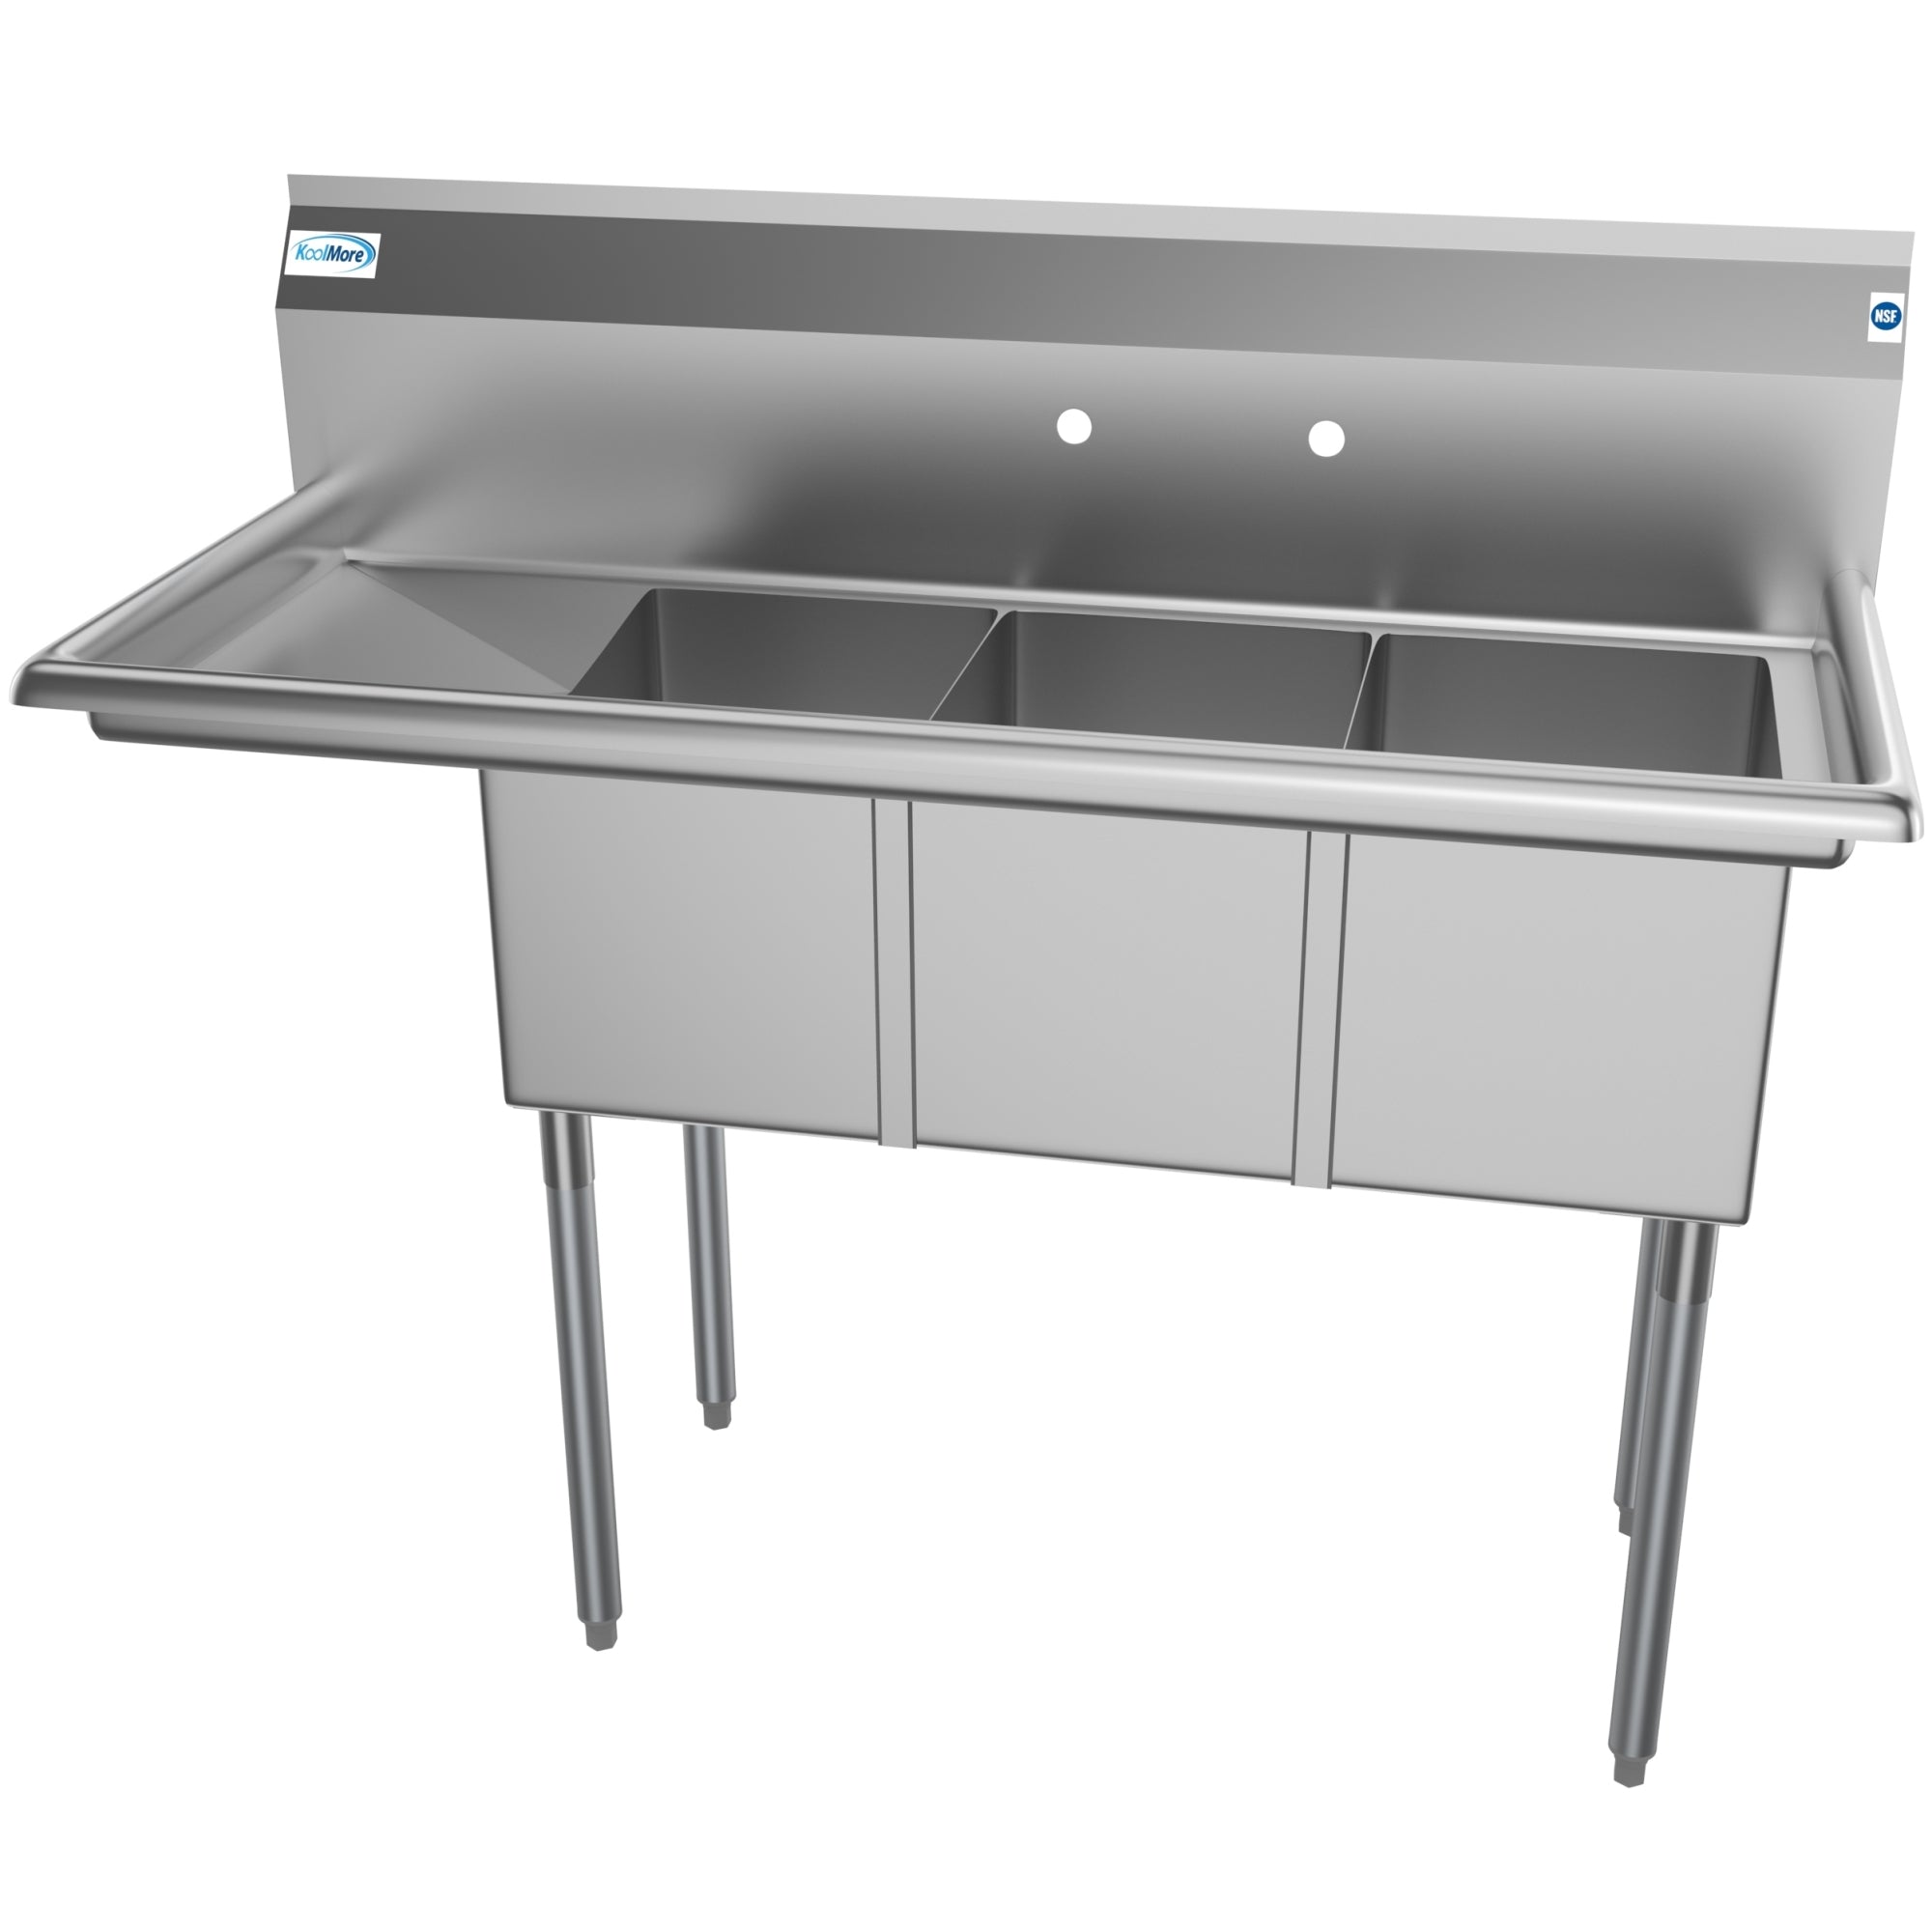 51 in. Three Compartment Stainless Steel Commercial Sink with Drainboard, Bowl Size 12